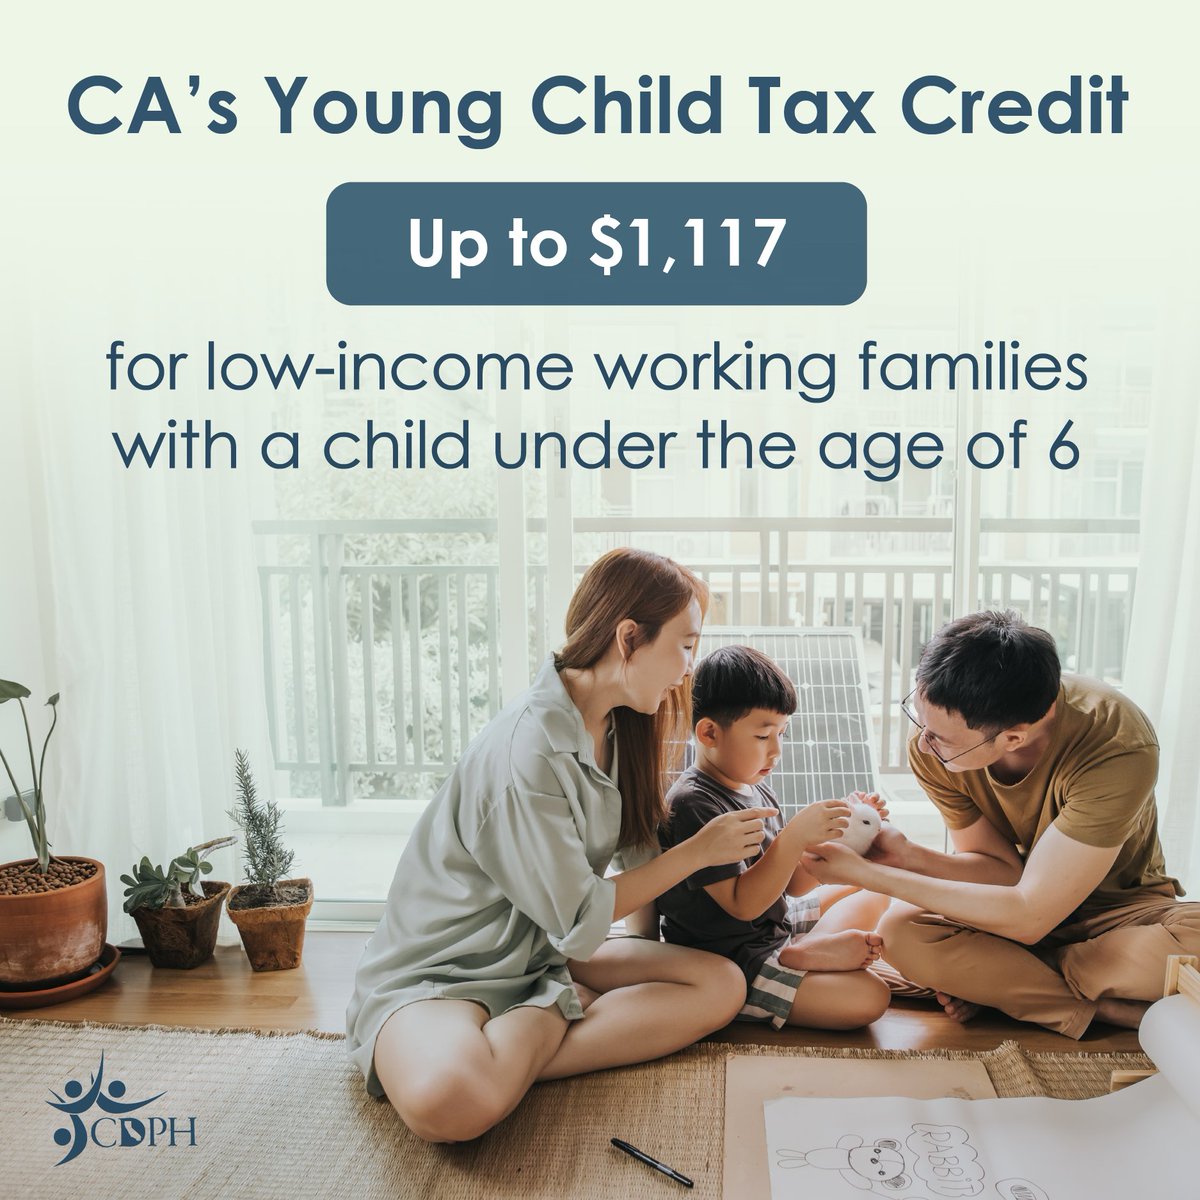 If you have a child under 6​, you may qualify for #CalEITC and the Young Child Tax Credit, which can increase your refund by hundreds of dollars! For more information about #YCTC visit: ftb.ca.gov/.../credits/yo…